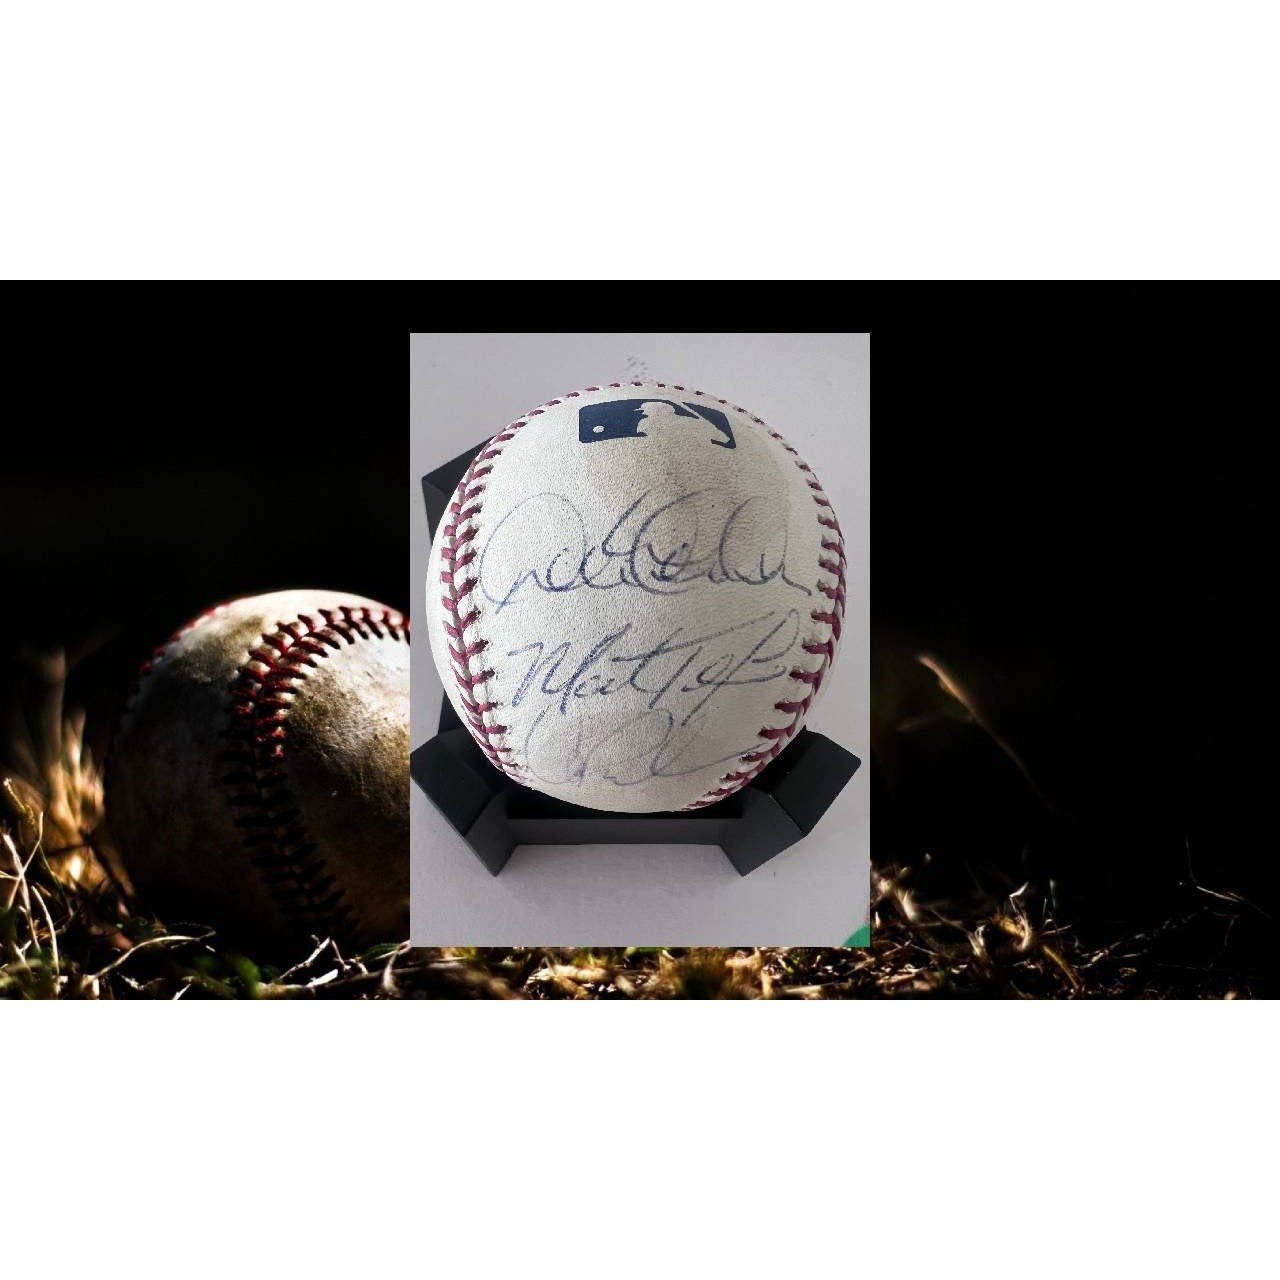 Derek Jeter Mark Teixeira Alex Rodriguez official Rawlings MLB baseball signed with proof